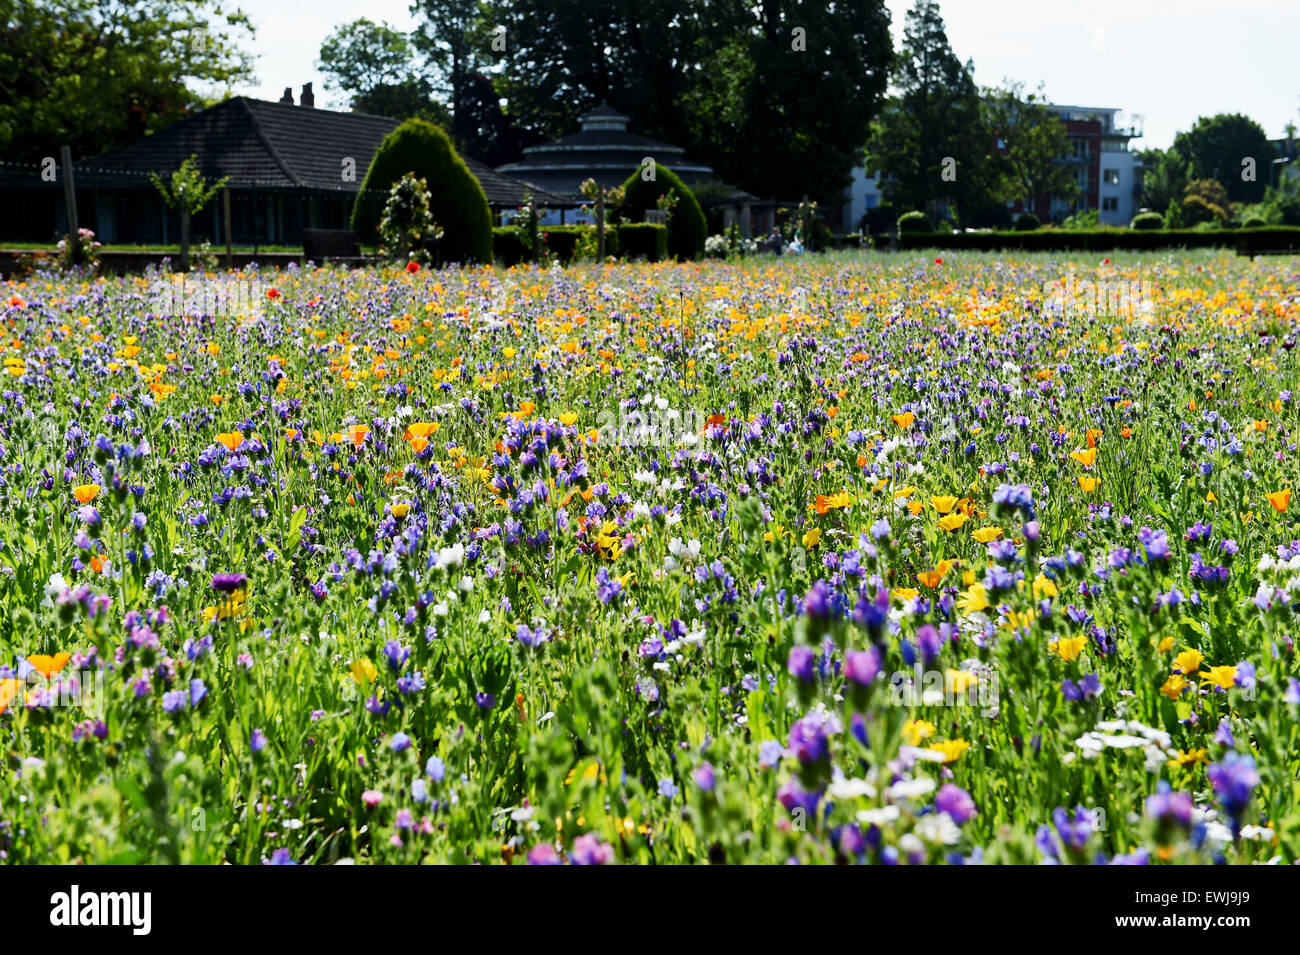 Brighton, UK. 27th June, 2015. Time to relax and enjoy the beautiful summer weather in the Preston Park Wild Flower Meadows in Brighton early today It is the second year a mixture of wild flowers have been sown on two old bowling greens by the city council providing habitat and food for bees , butterflies and other insects  Credit:  Simon Dack/Alamy Live News Stock Photo